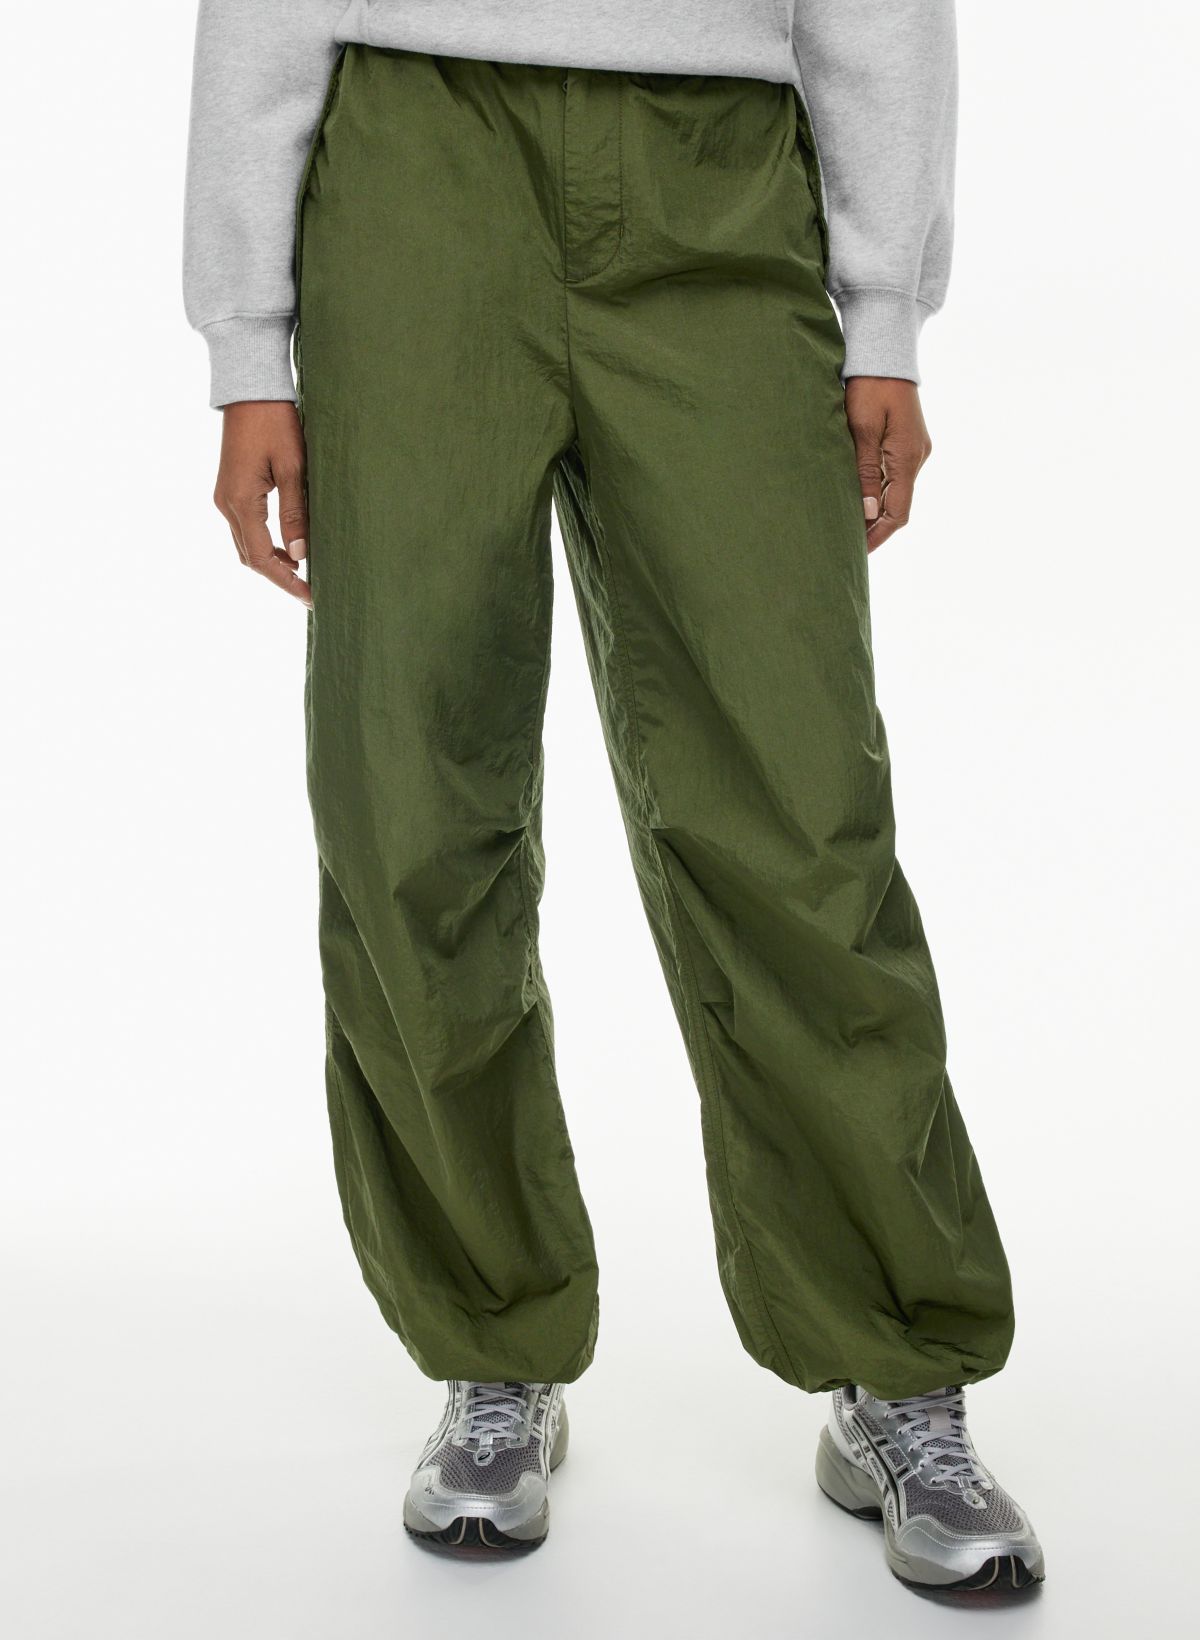 Is it Time to invest in Parachute Pants? — Clique